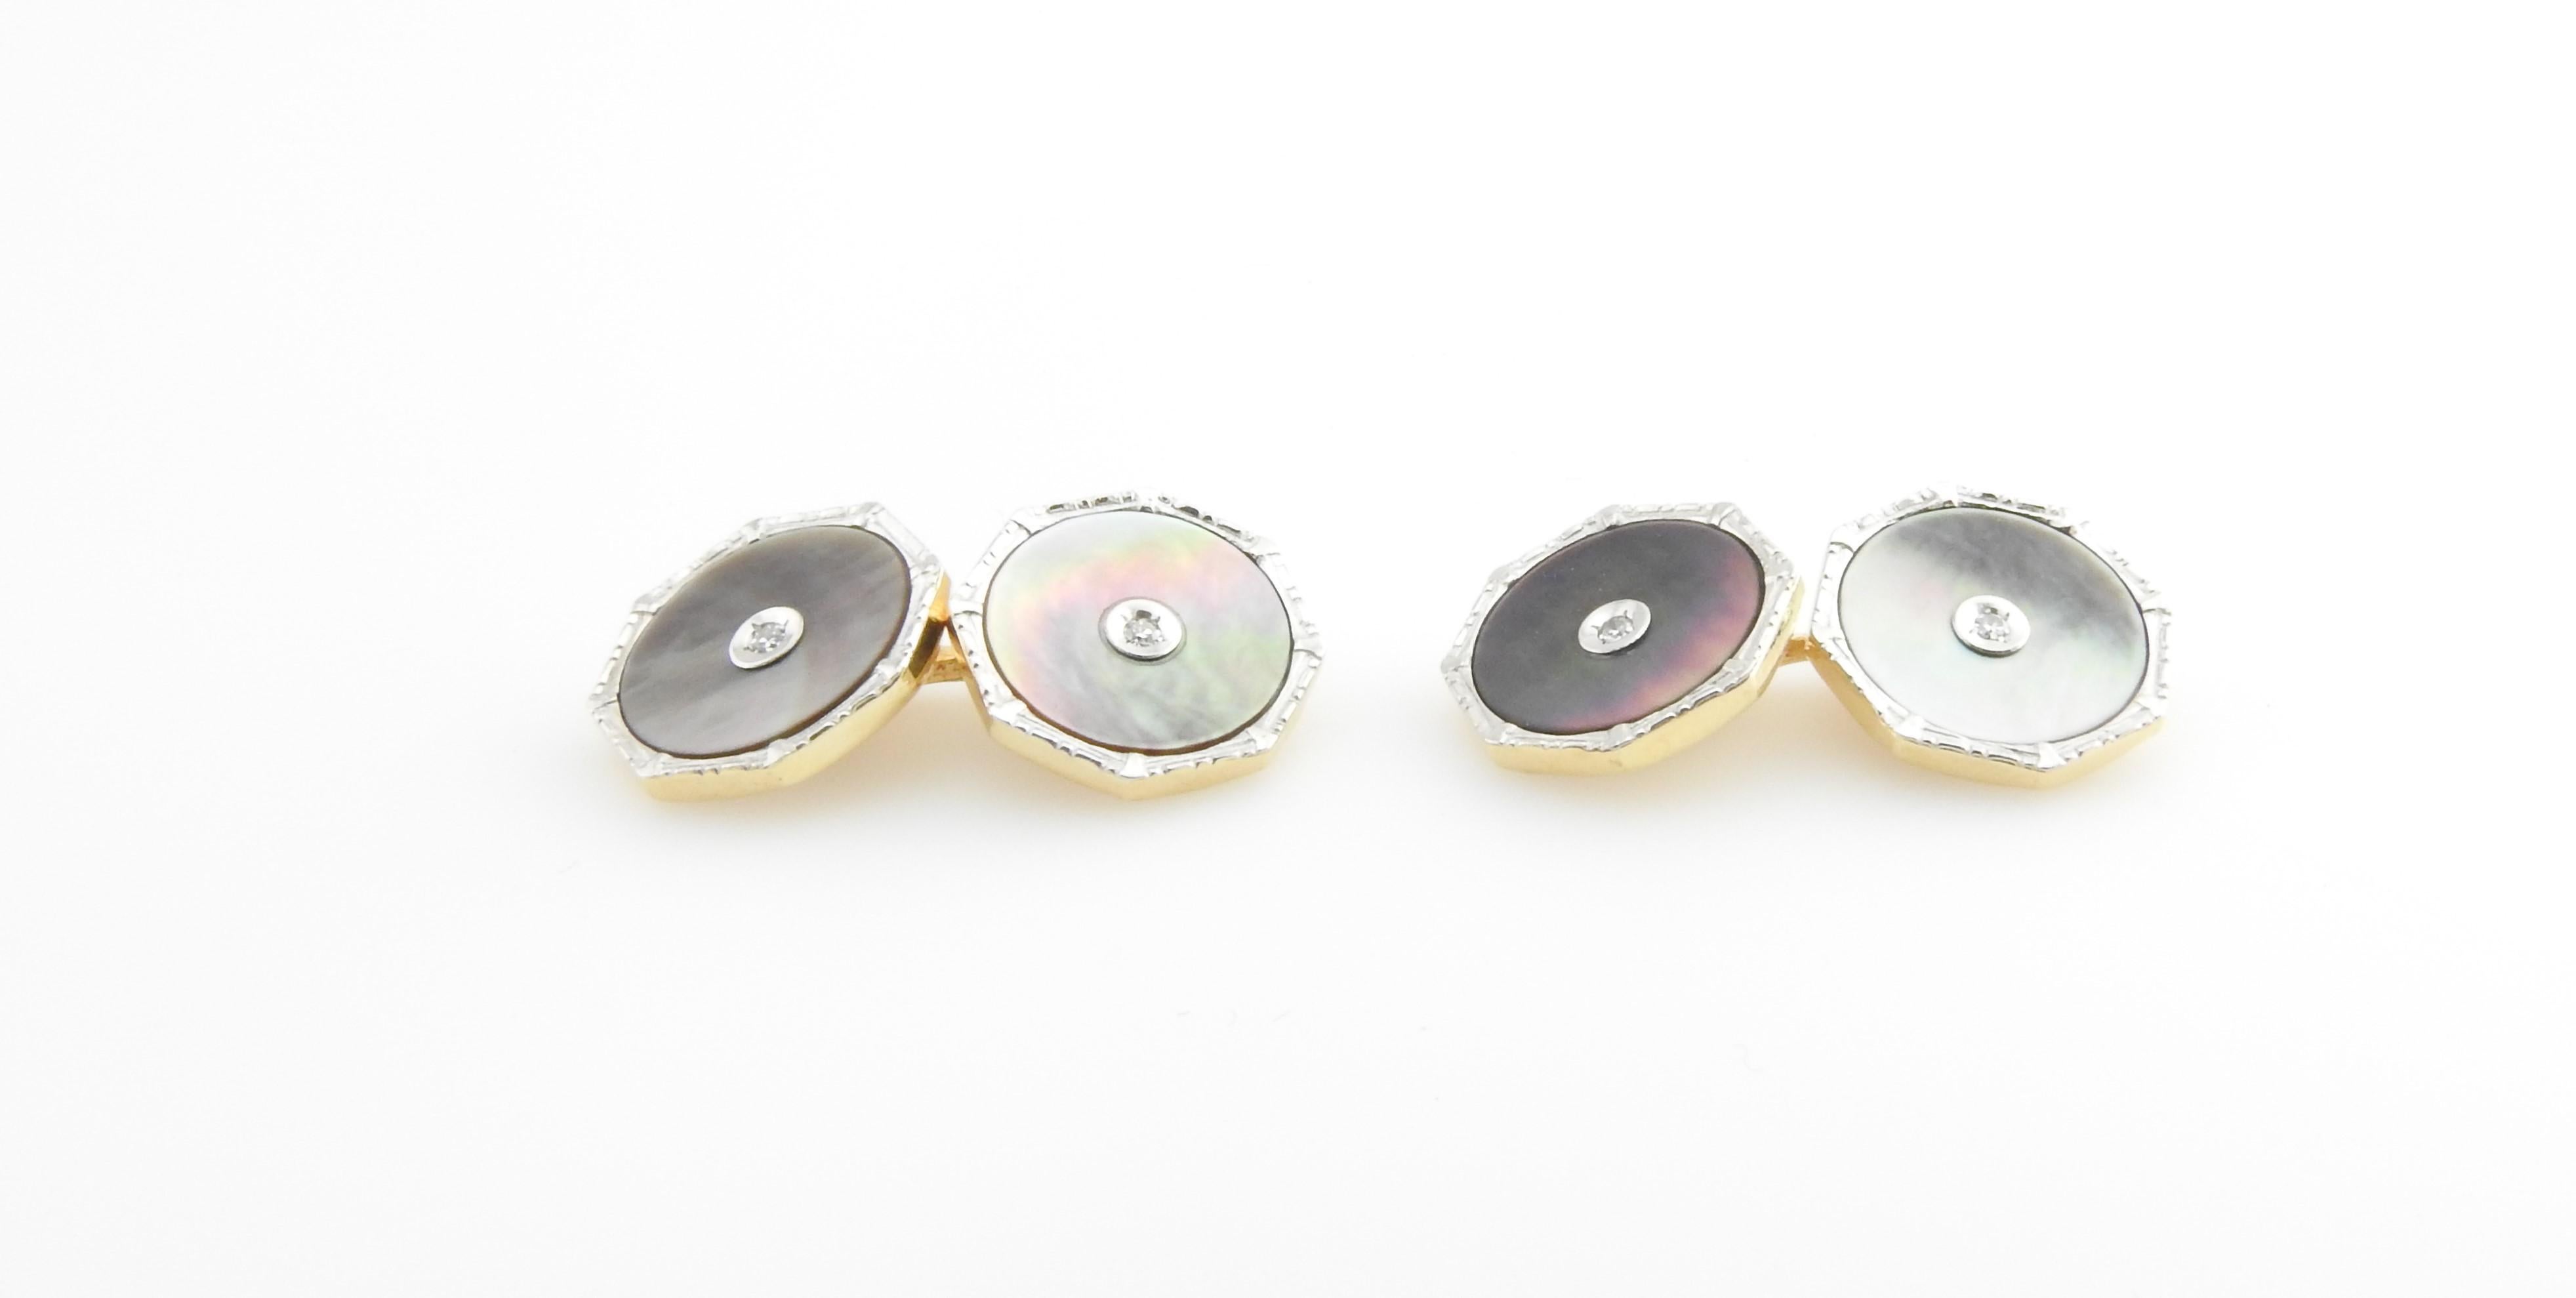 Vintage 14 Karat White Gold Mother of Pearl and Diamond Cuff Links

These lovely cufflinks each feature mother of pearl and two round single cut diamonds set in beautifully detailed 14K white gold.

Approximate total diamond weight: .04 ct.

Diamond